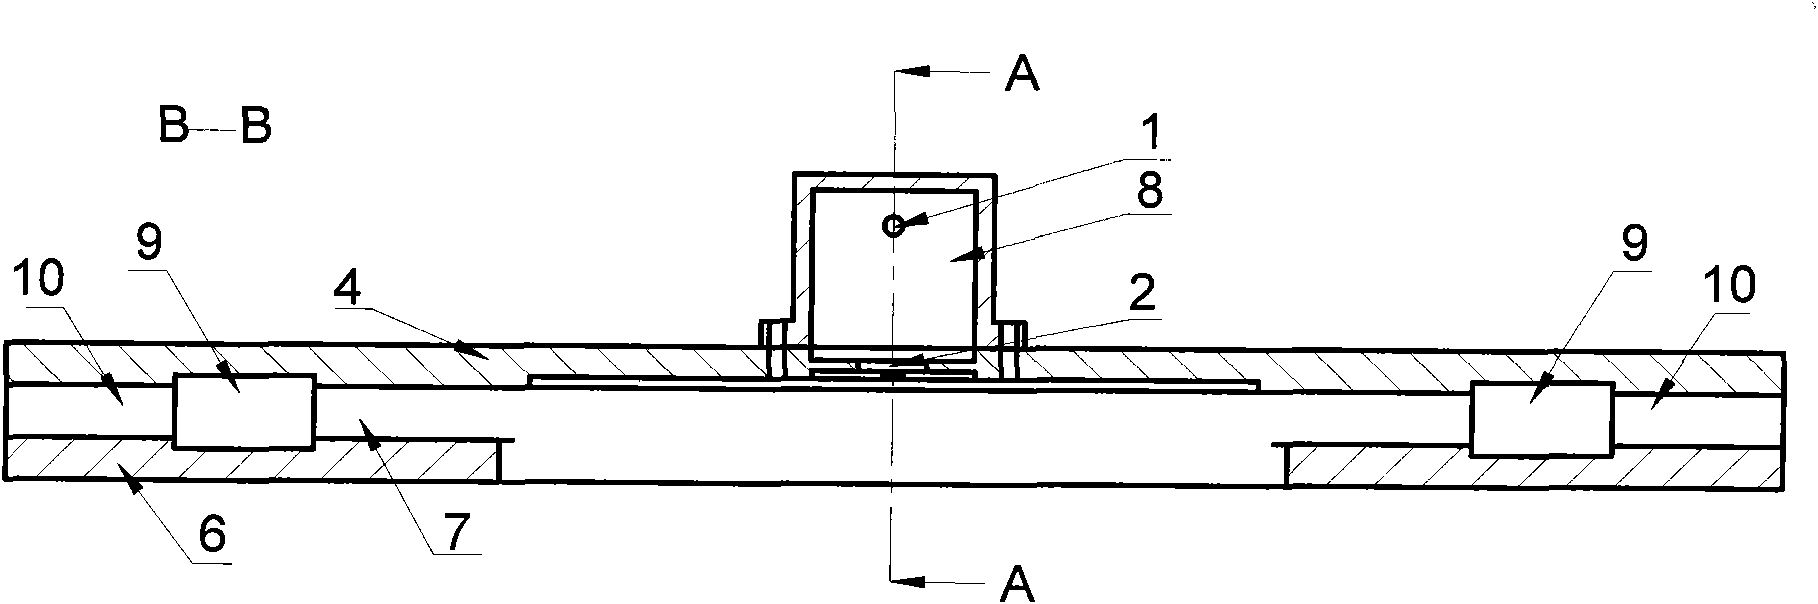 Microwave cavity for cold atomic clock in micro-gravity environment